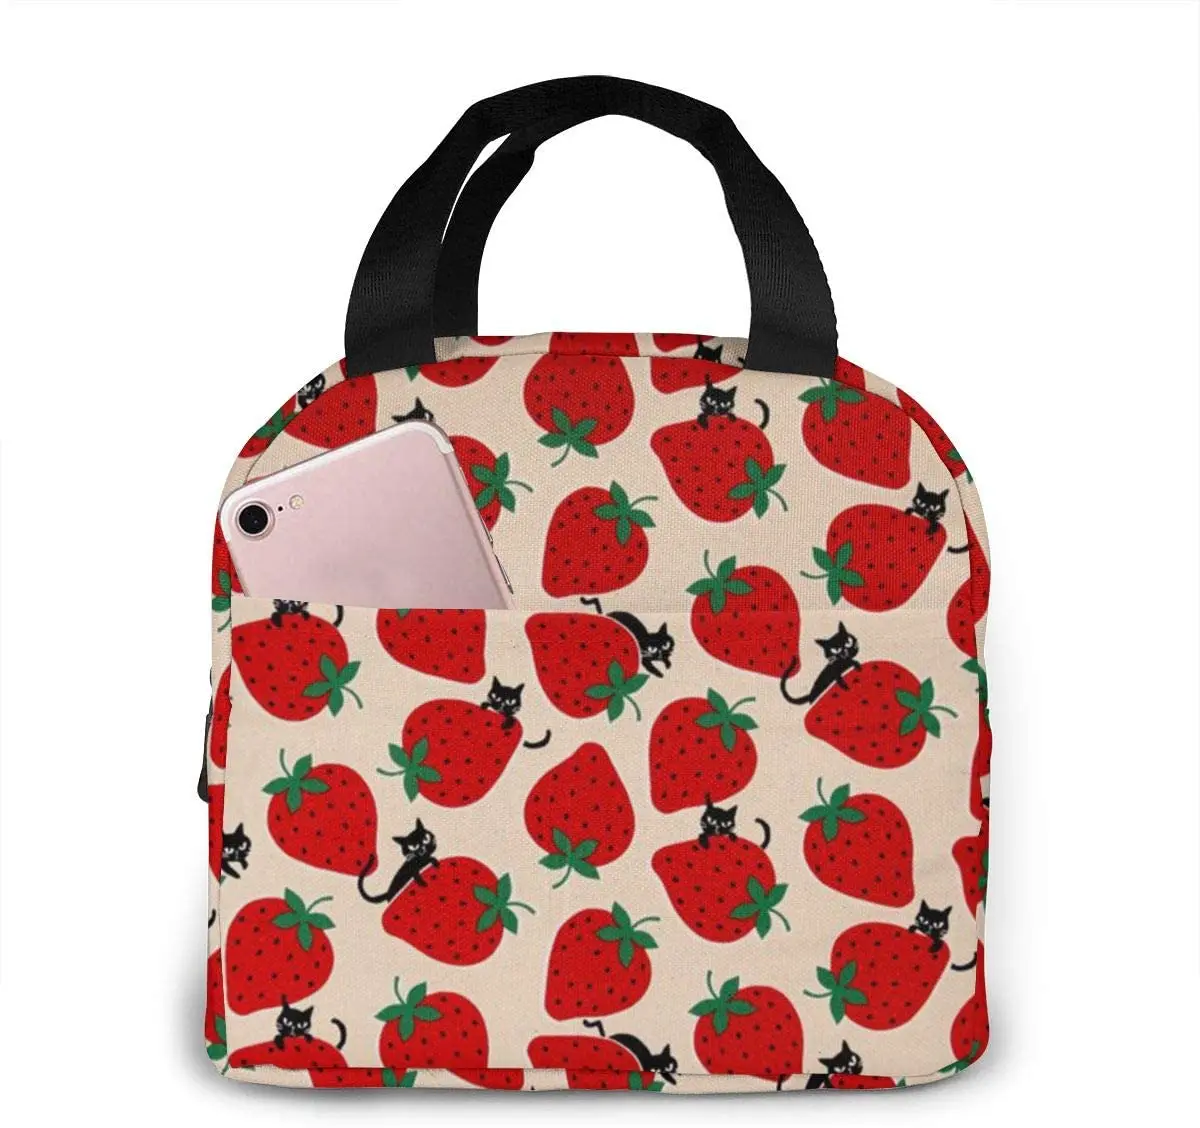 Black Cat On Red Strawberry Lunch Bag For Women Girls Kids Insulated Picnic Pouch Thermal Bento Prep Cute Bag Lunch Box Camping